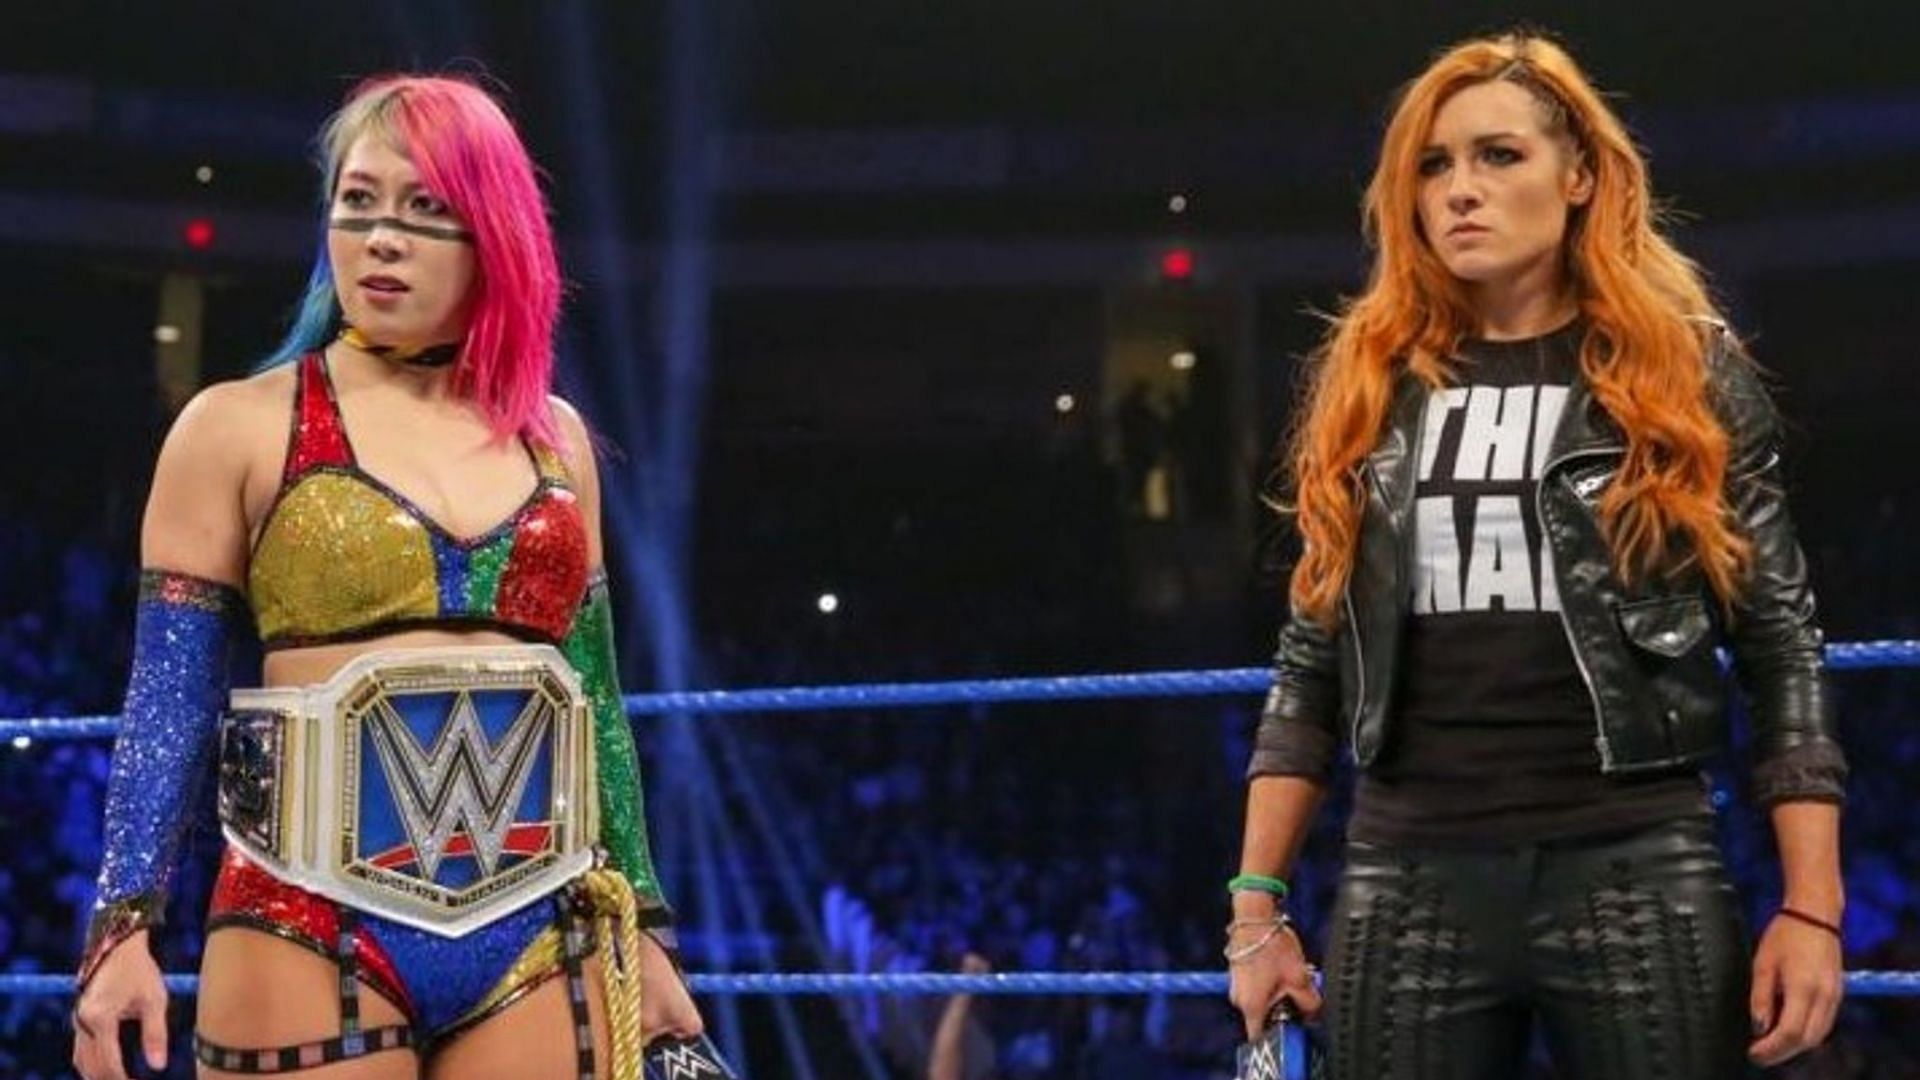 Could Asuka and Lynch form an unstoppable team?